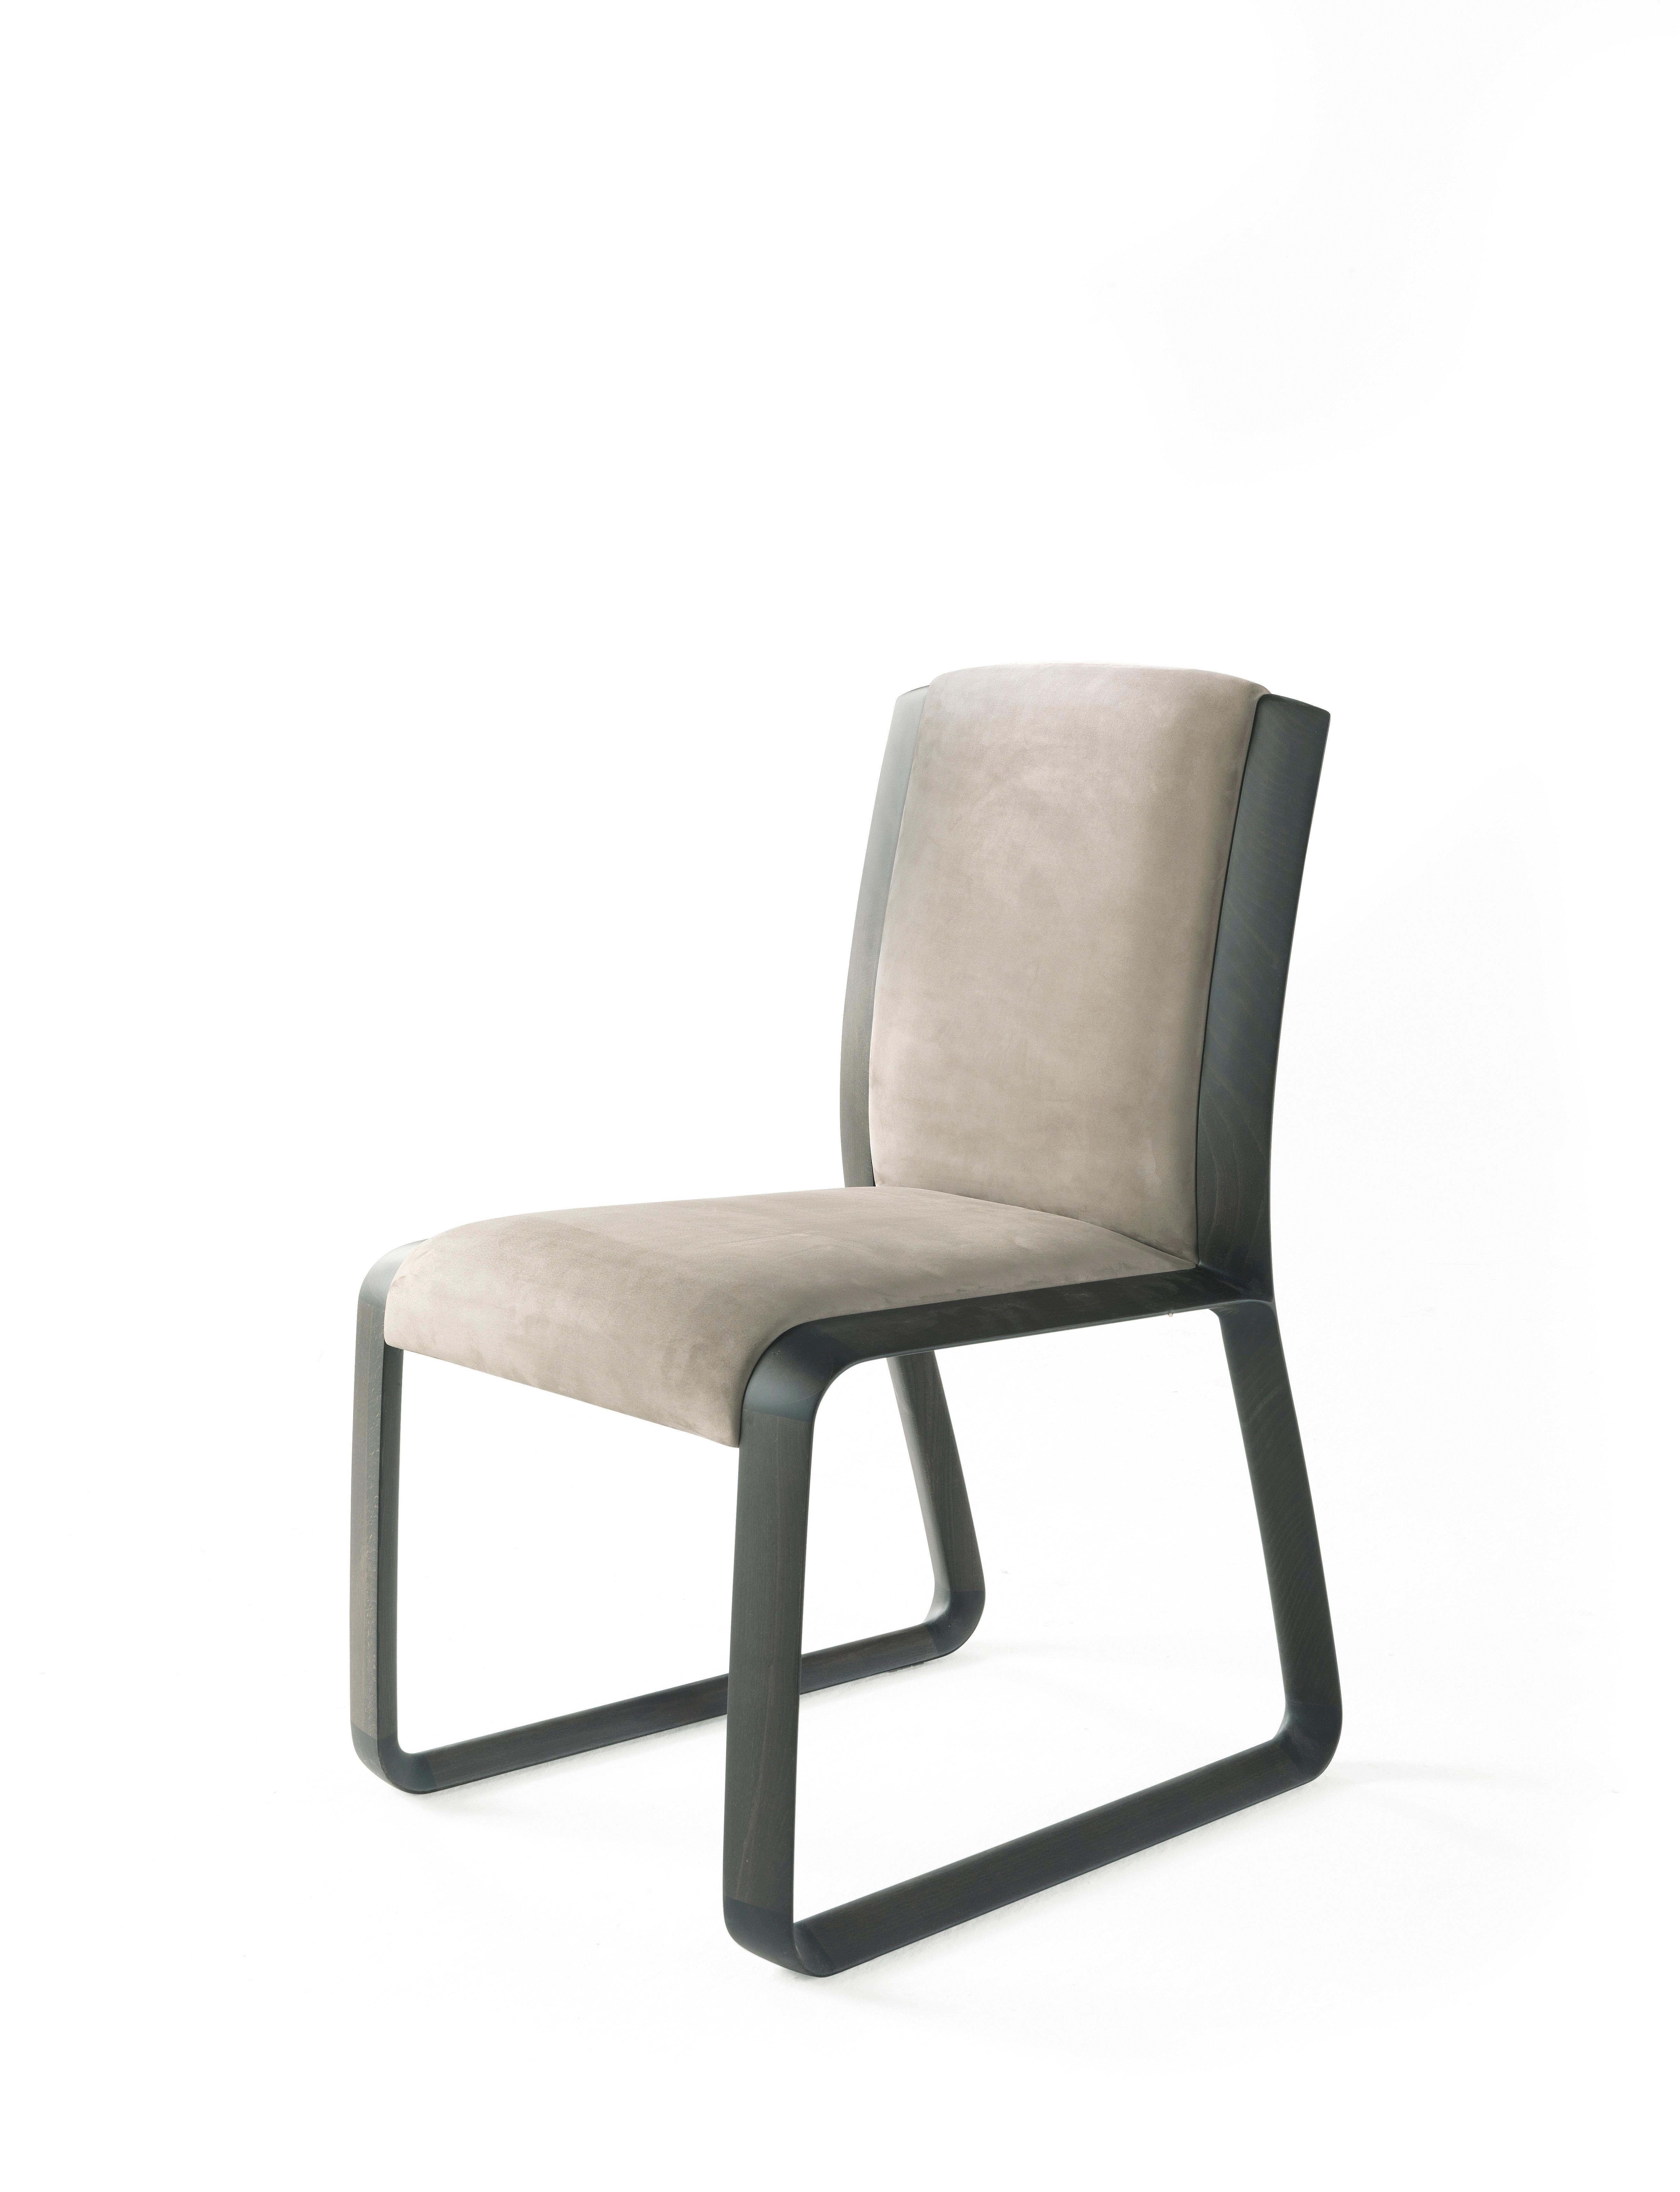 A minimalist aesthetic and a comfortable seat are emphasized by the sensual nubuck upholstery for the Wynwood chair. Height, size and design are studied to complement refined but sober desks or dining tables.
Wynwood Chair with structure in solid